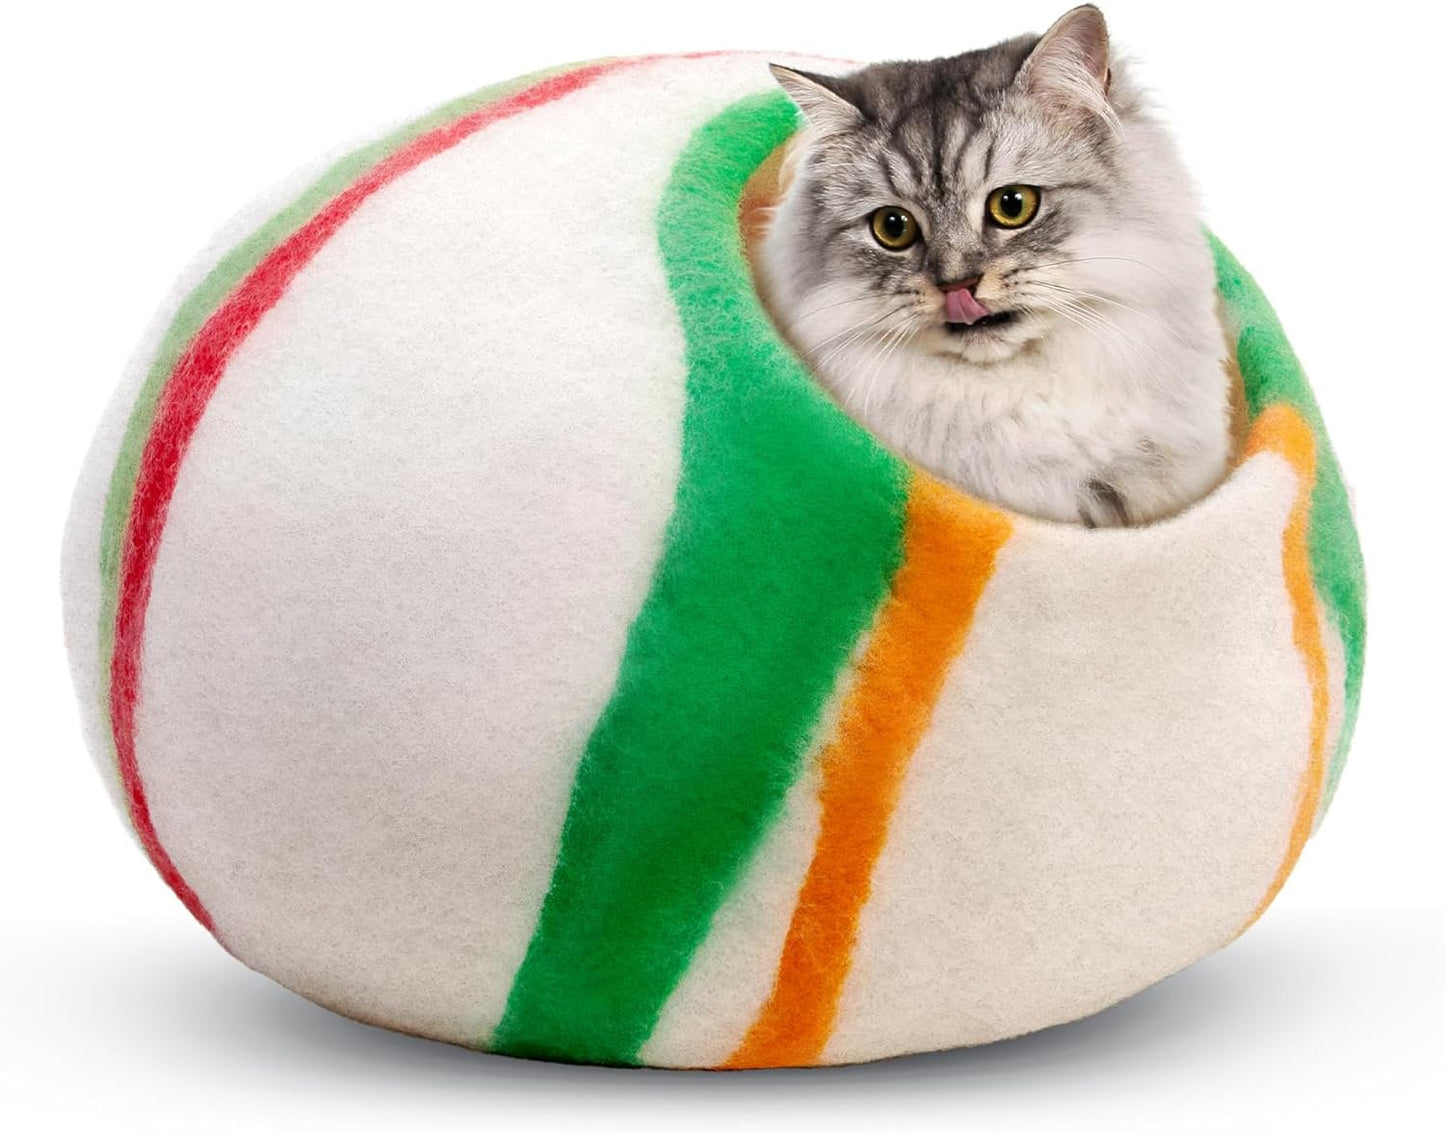 Luxury cat bed with felt material